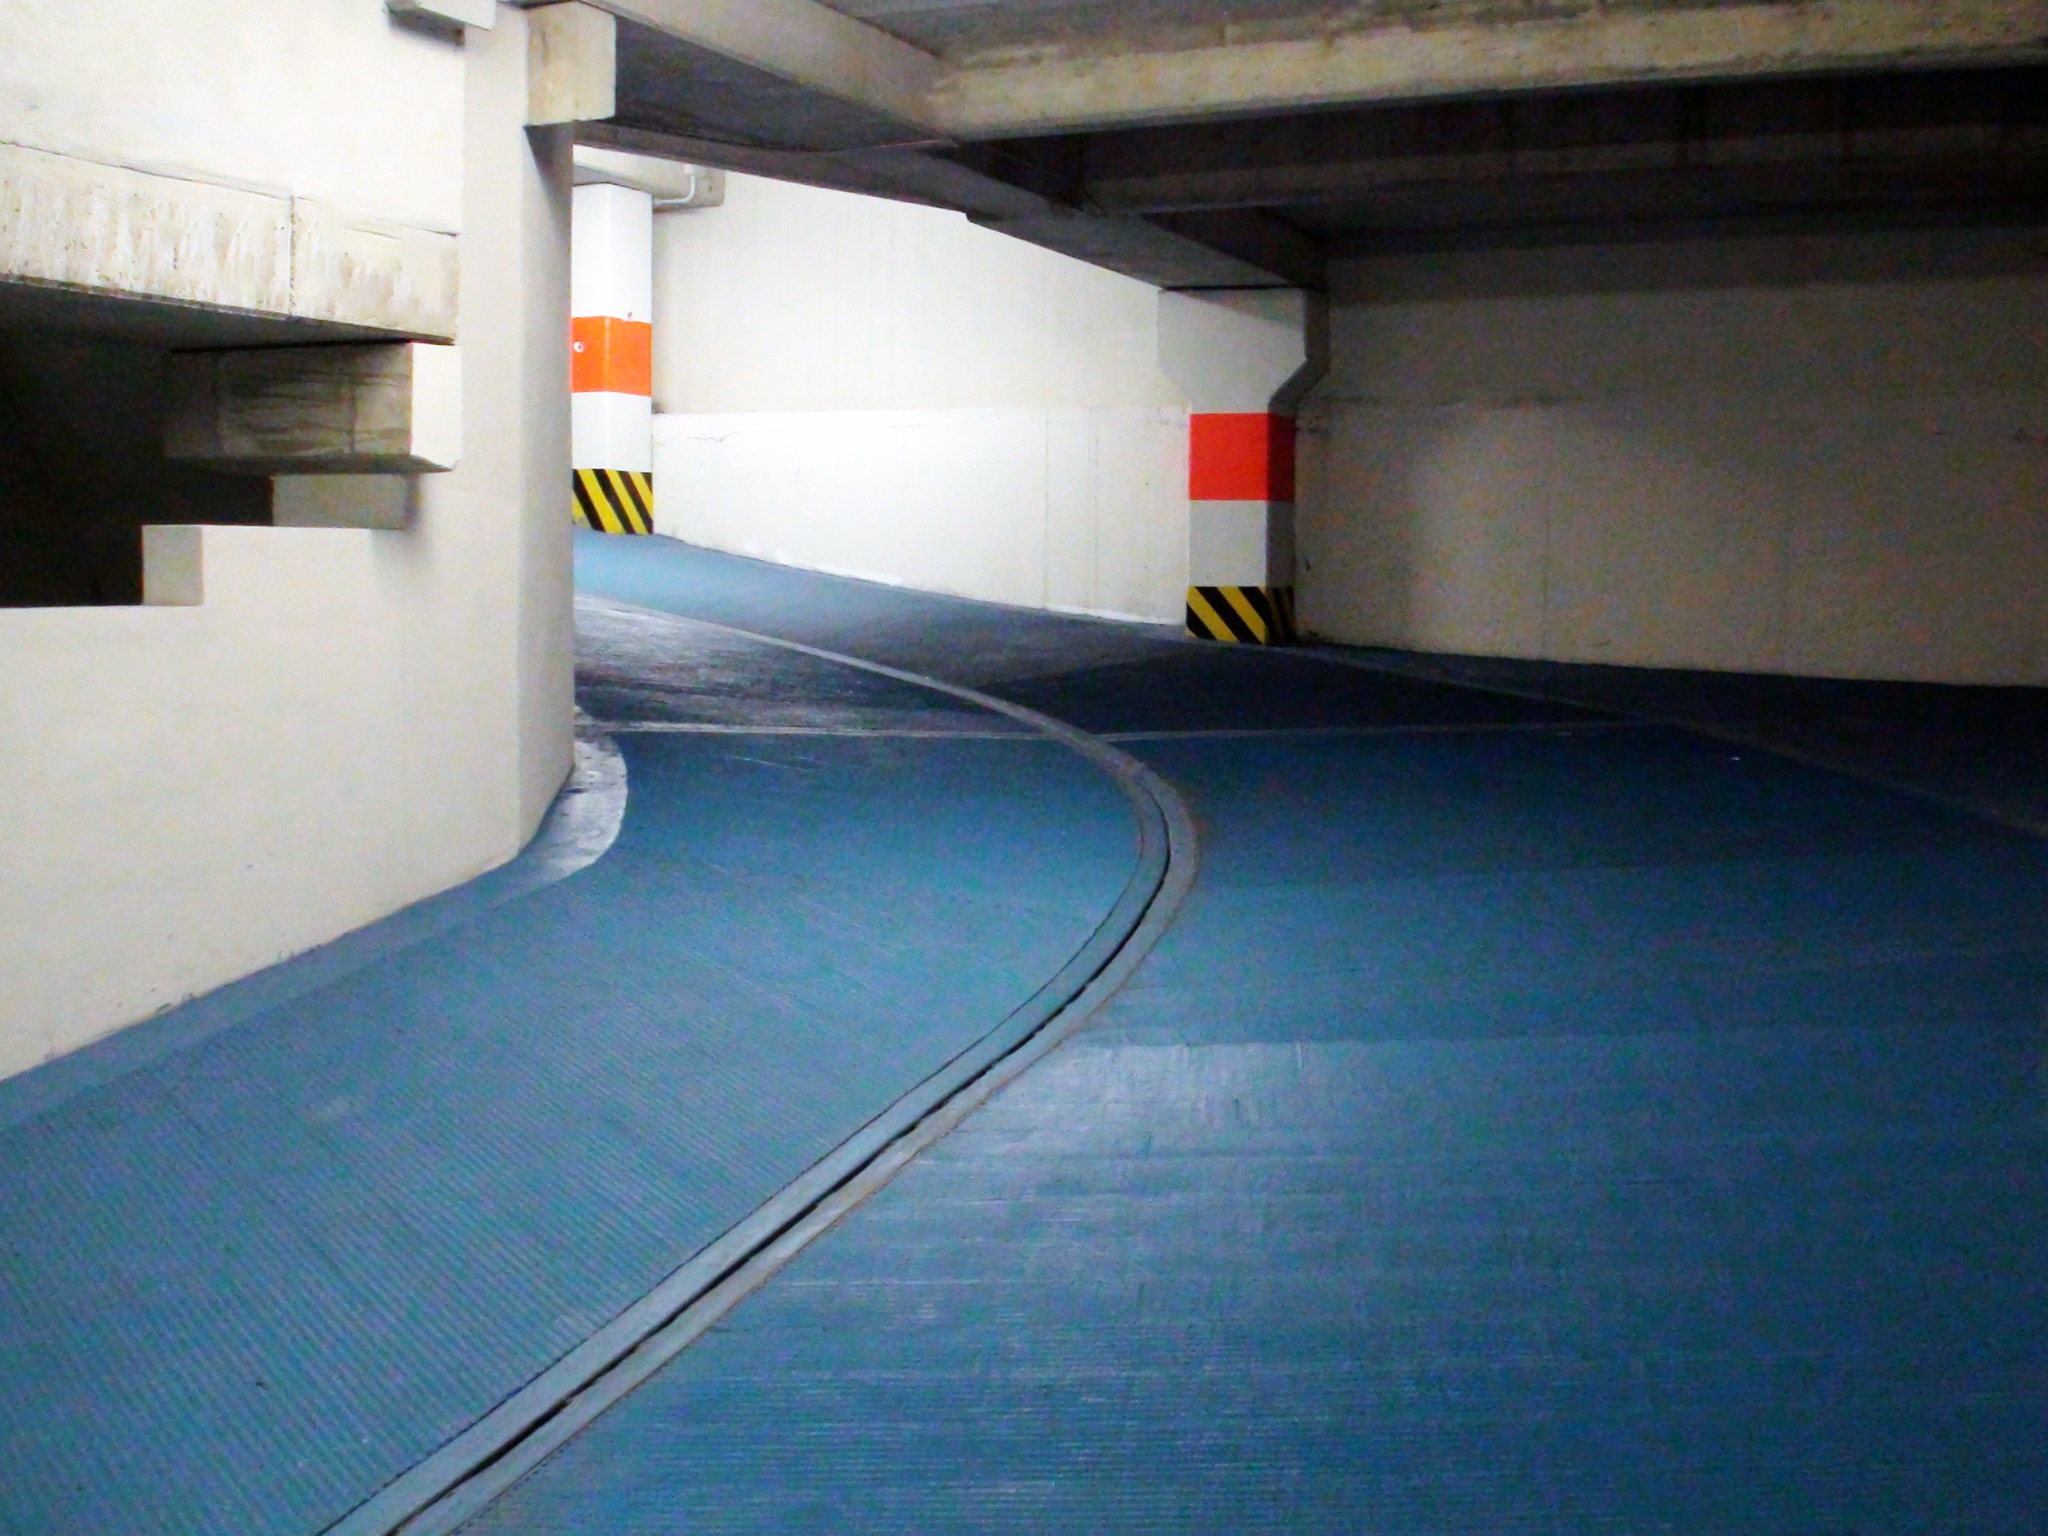 Access ramp from the courtyard to the garage at first basement floor - Atlantic Business Center - Milan